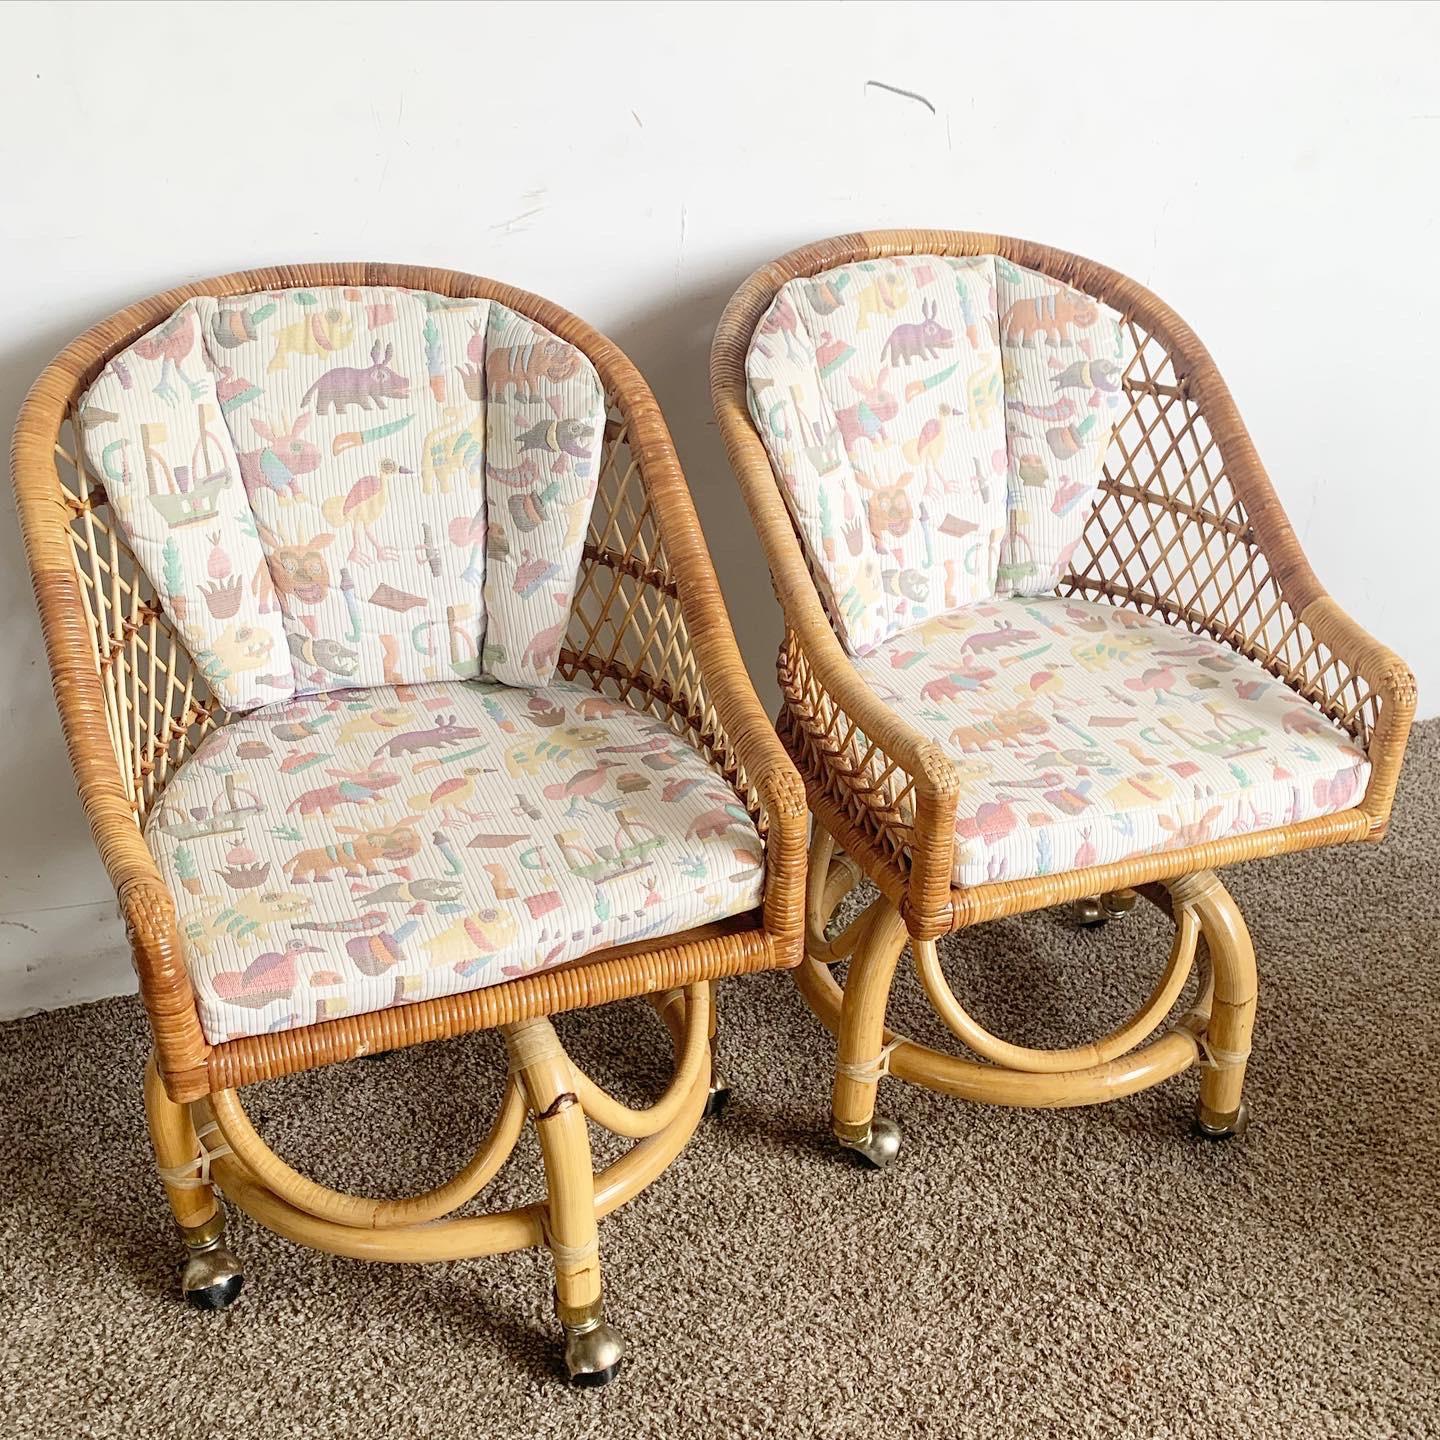 Add a playful yet sophisticated touch to your dining space with this pair of Boho Chic Buri Rattan Swivel Dining Arm Chairs. Crafted from buri rattan and adorned with multi-colored animal print upholstery, these chairs offer both style and